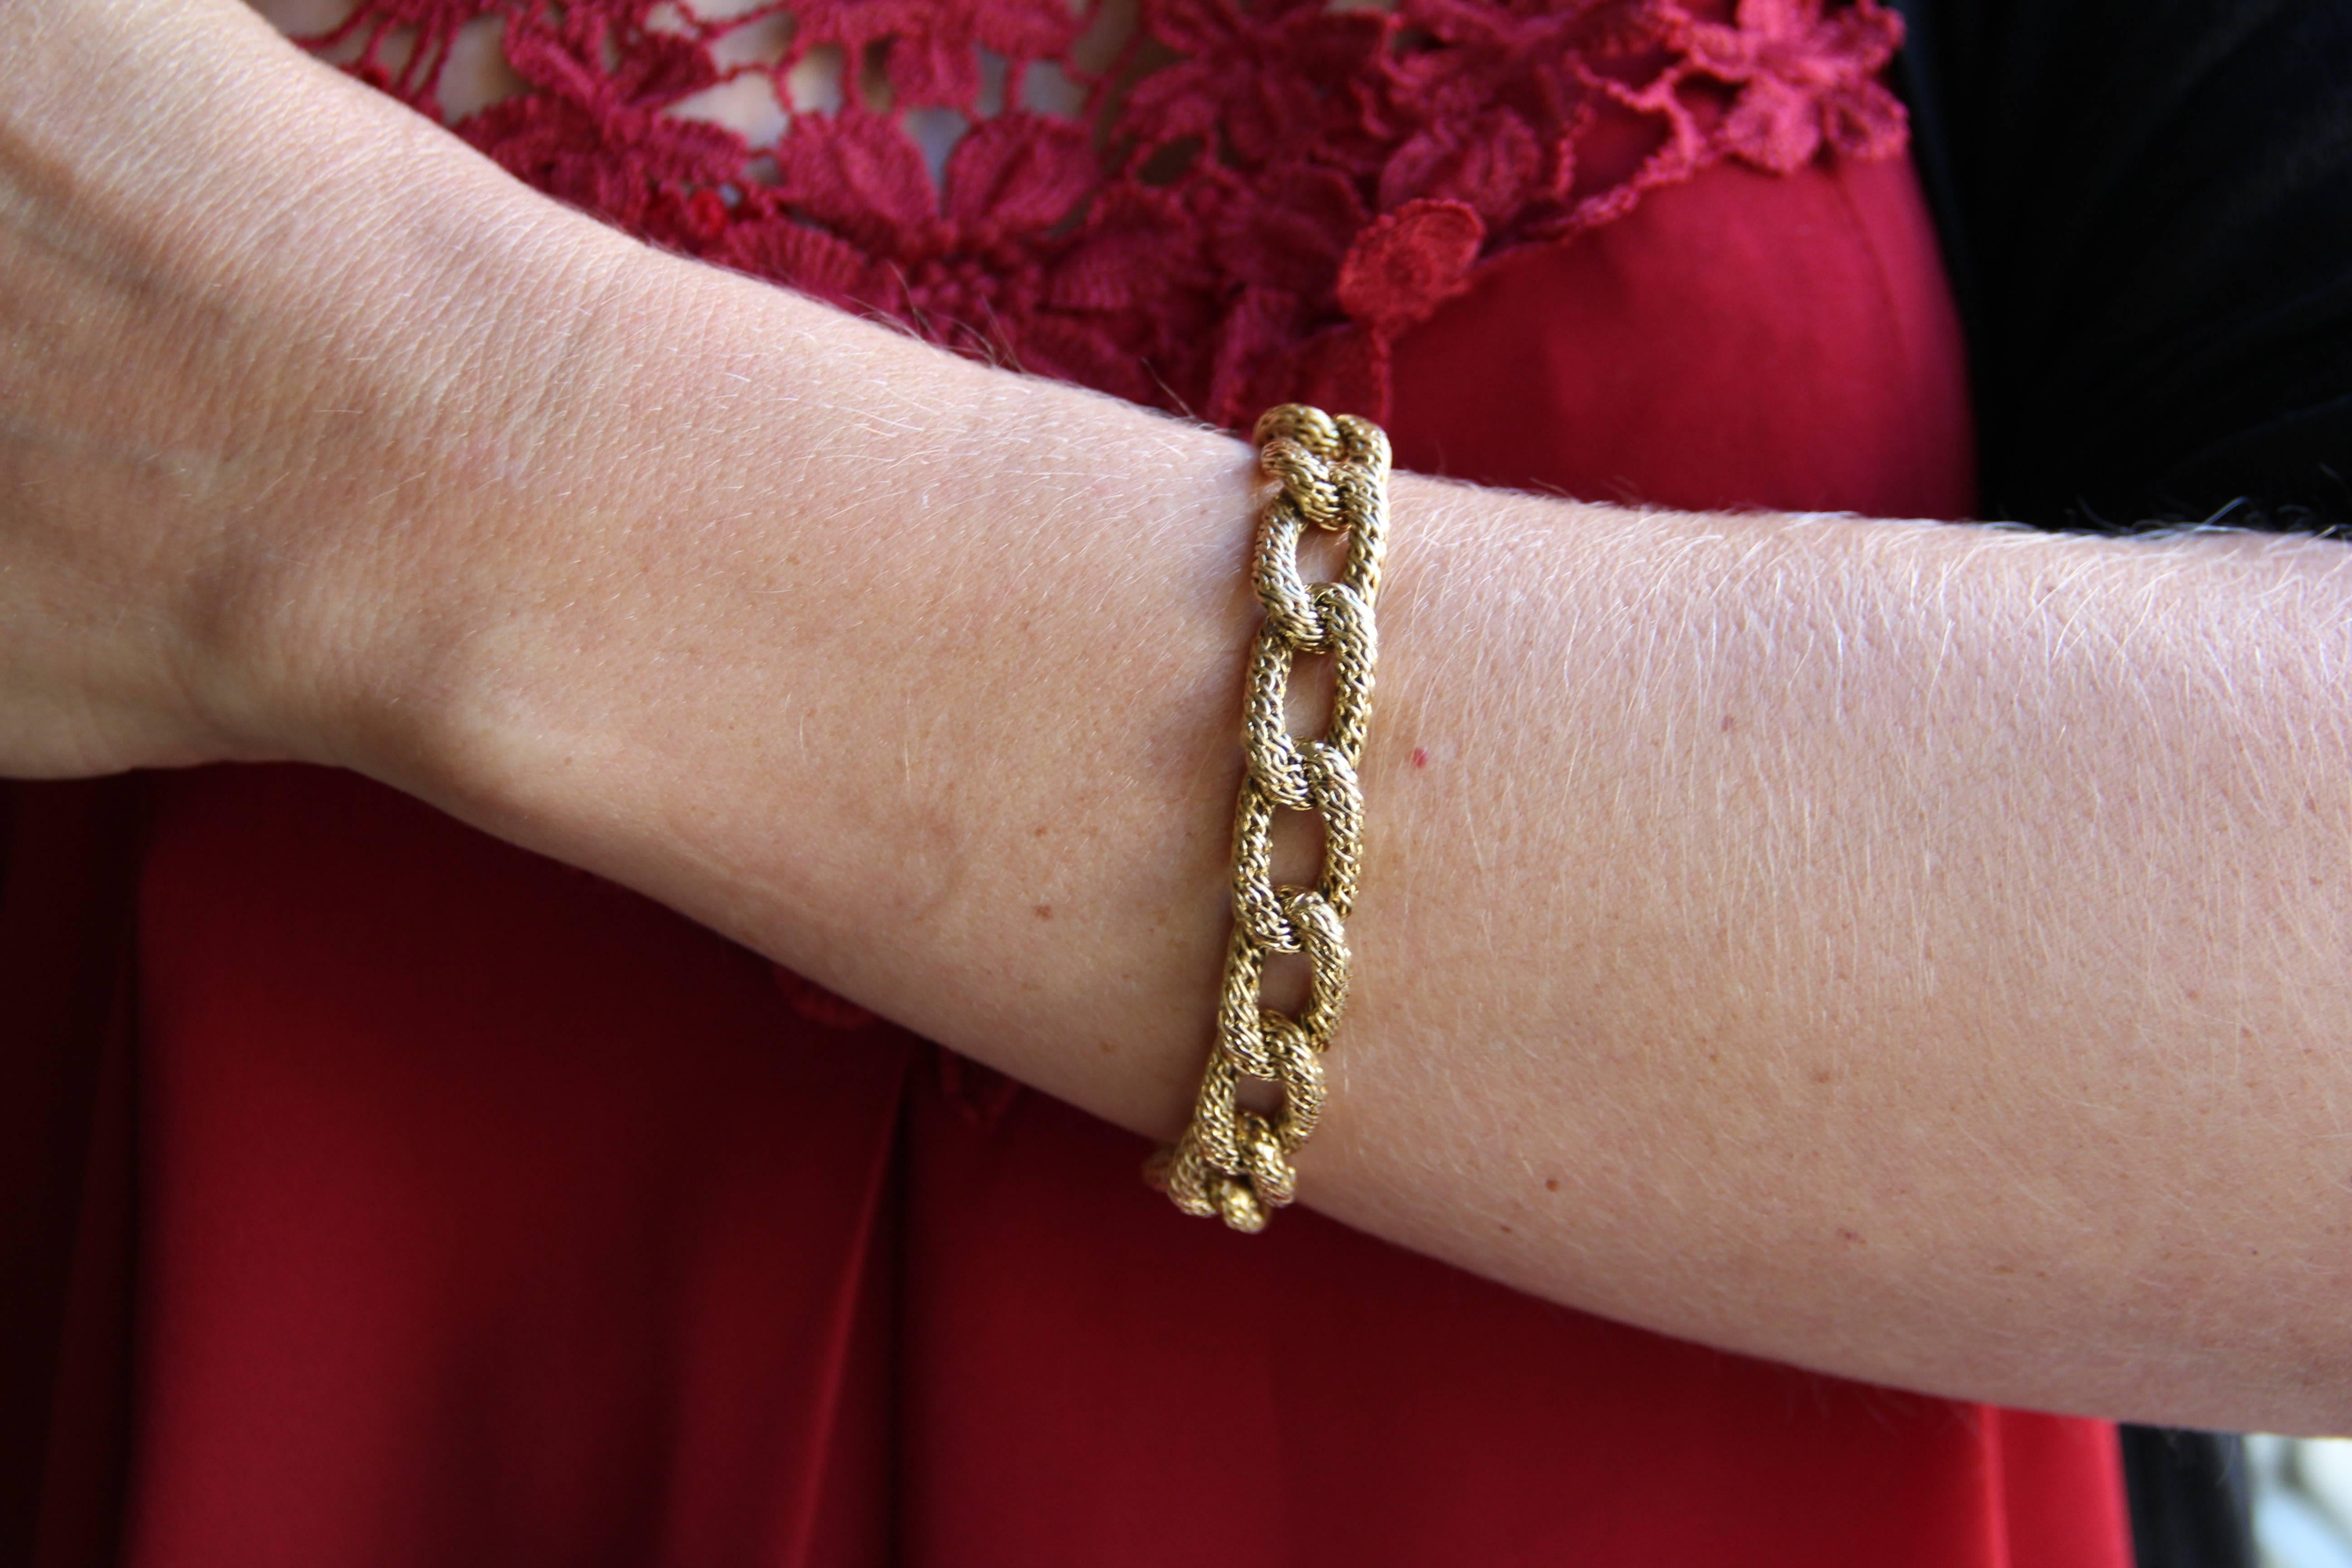 Bracelet in 18 karat yellow gold, rhinoceros head hallmark.
Superb vintage bracelet, it is formed of a gourmette mesh chiseled and interlaced. The clasp is ratchet with 2 8 security.
Authentic vintage bracelet - French work of the 1960s.
Total